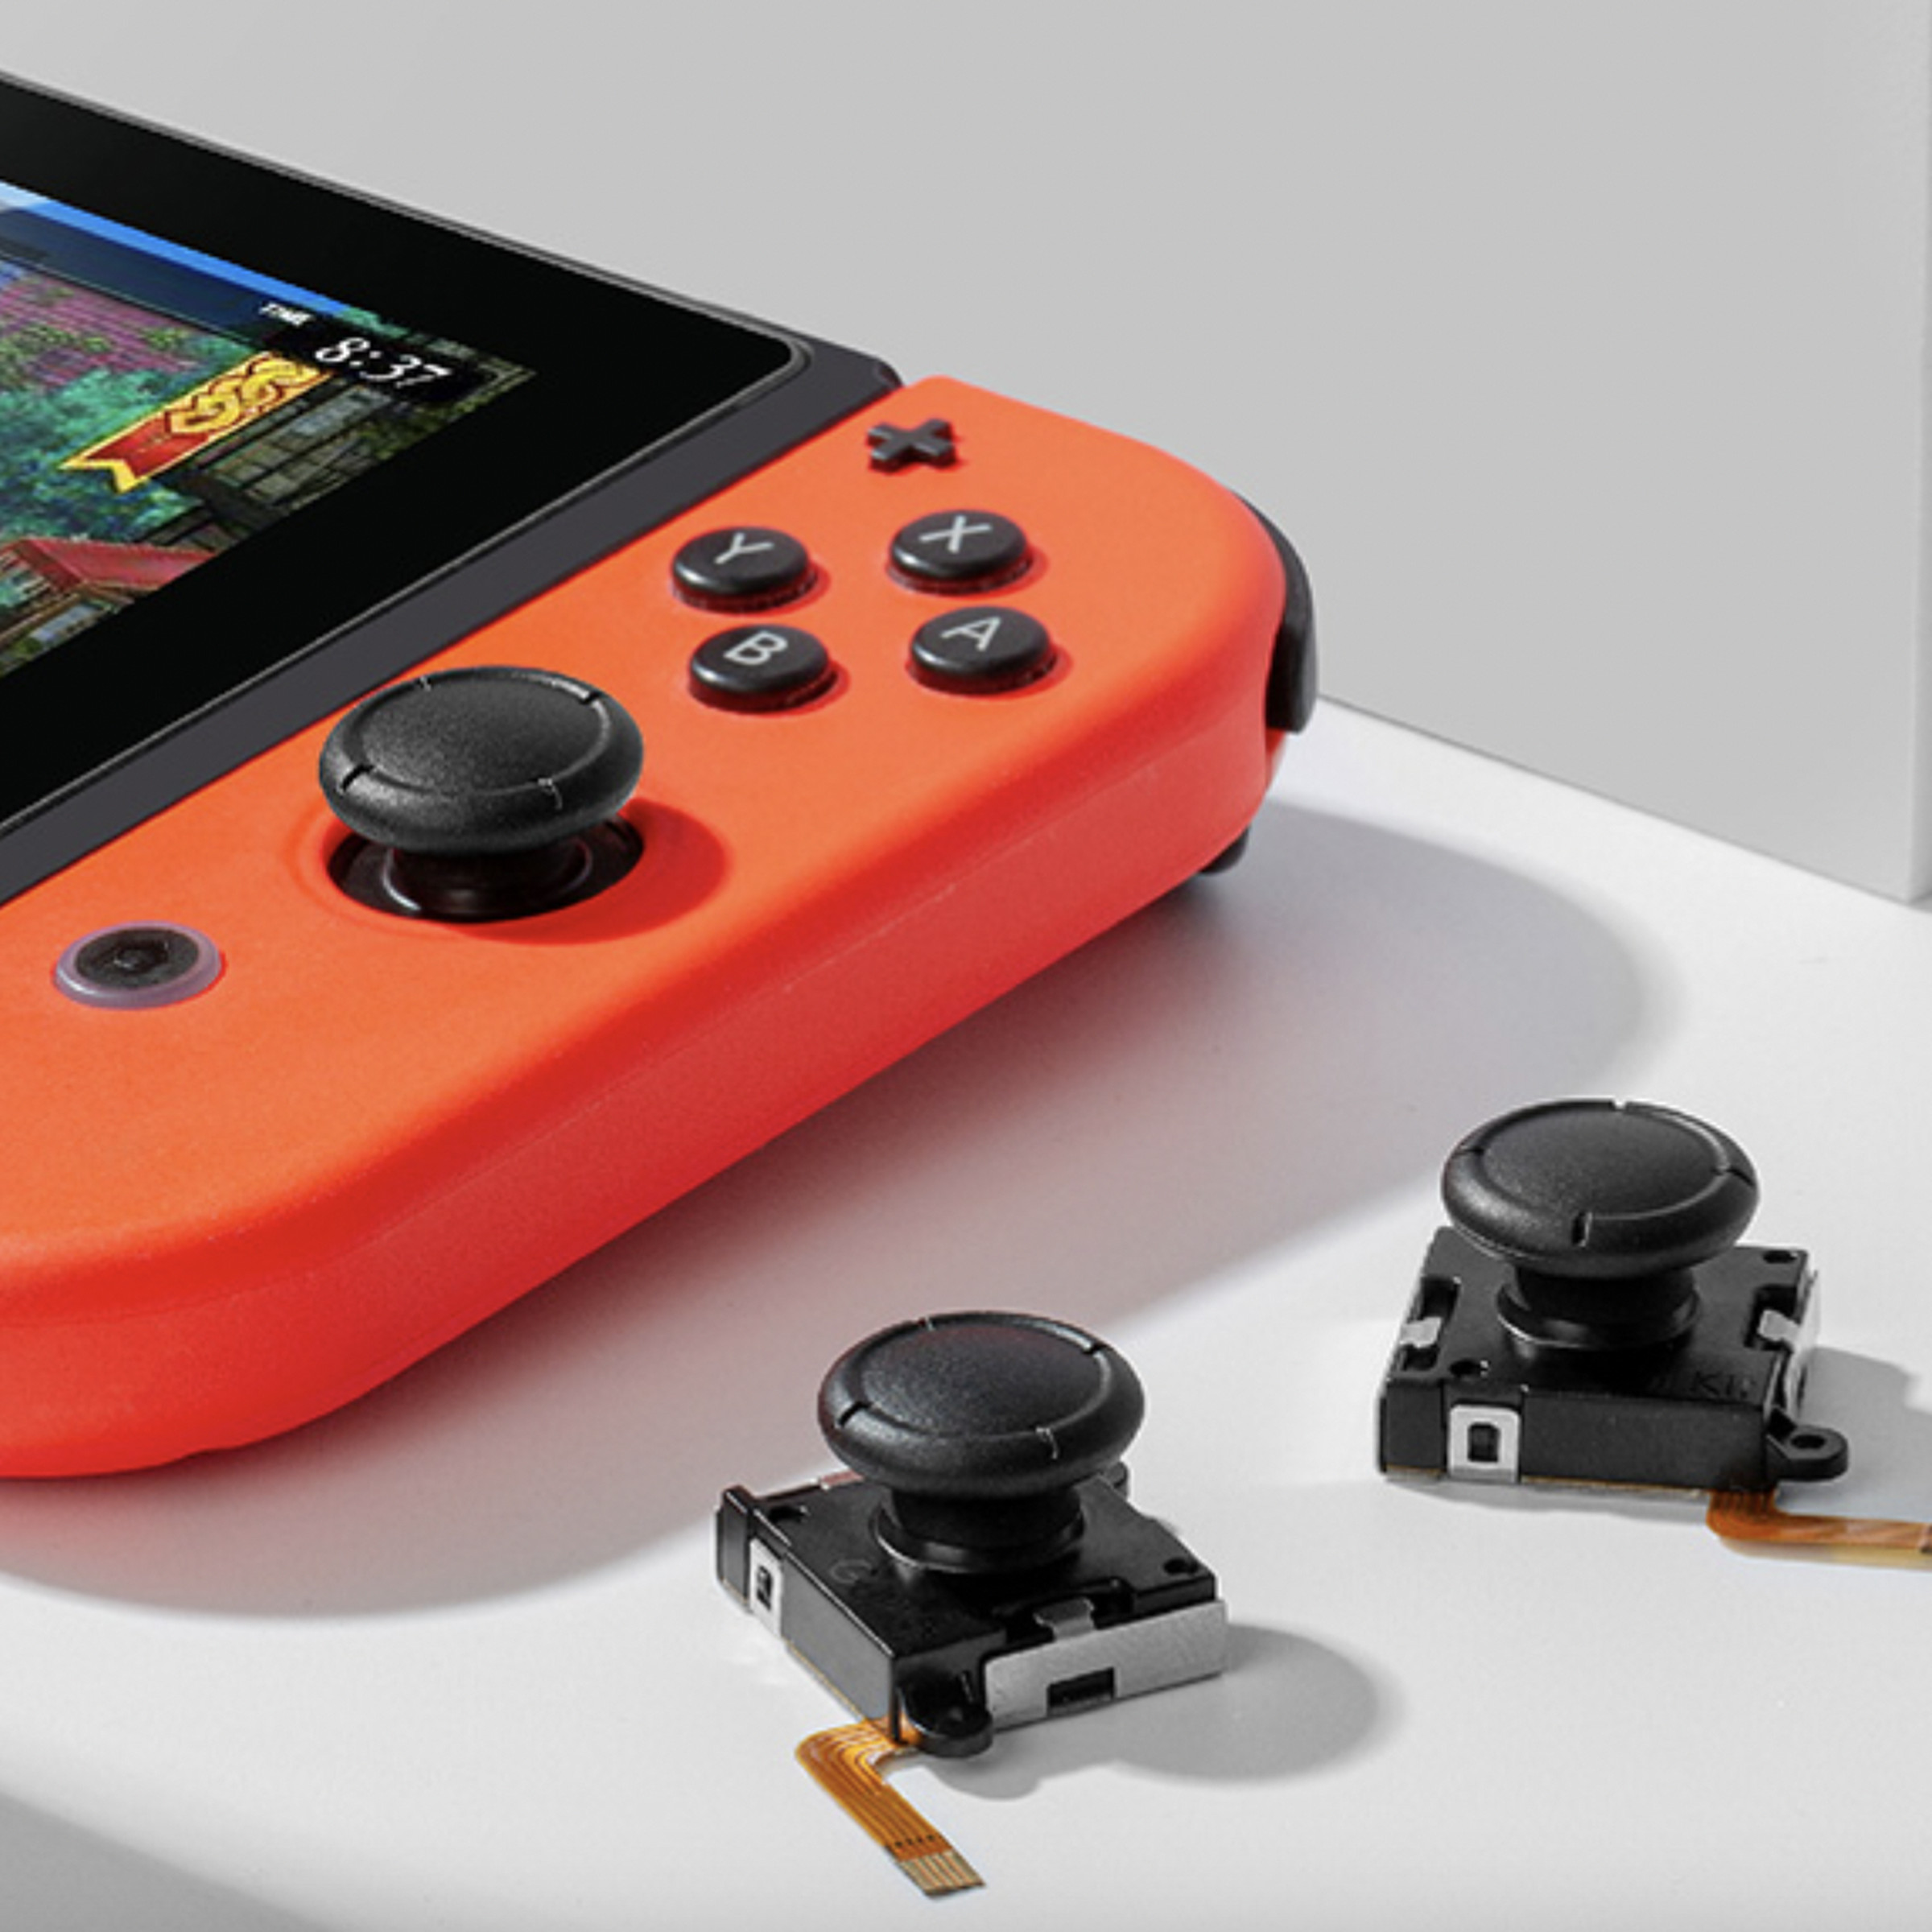 An image showing Gulikit’s joystick replacements next to a Nintendo Switch